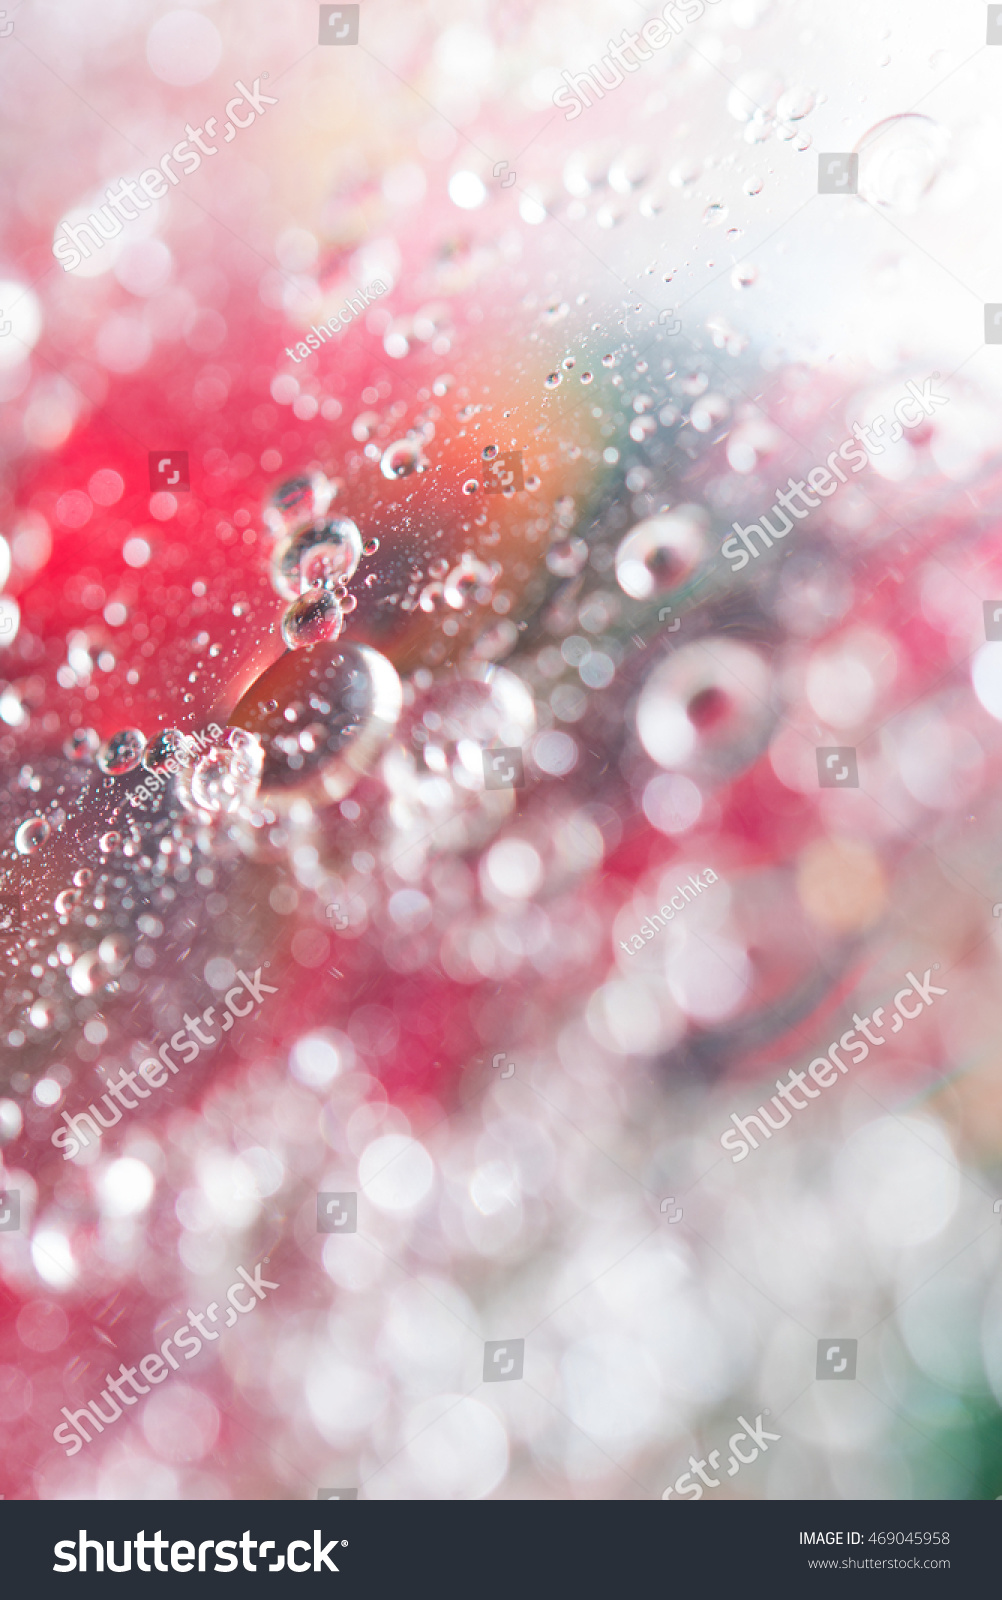 Oil drops abstract vivid colors background #469045958